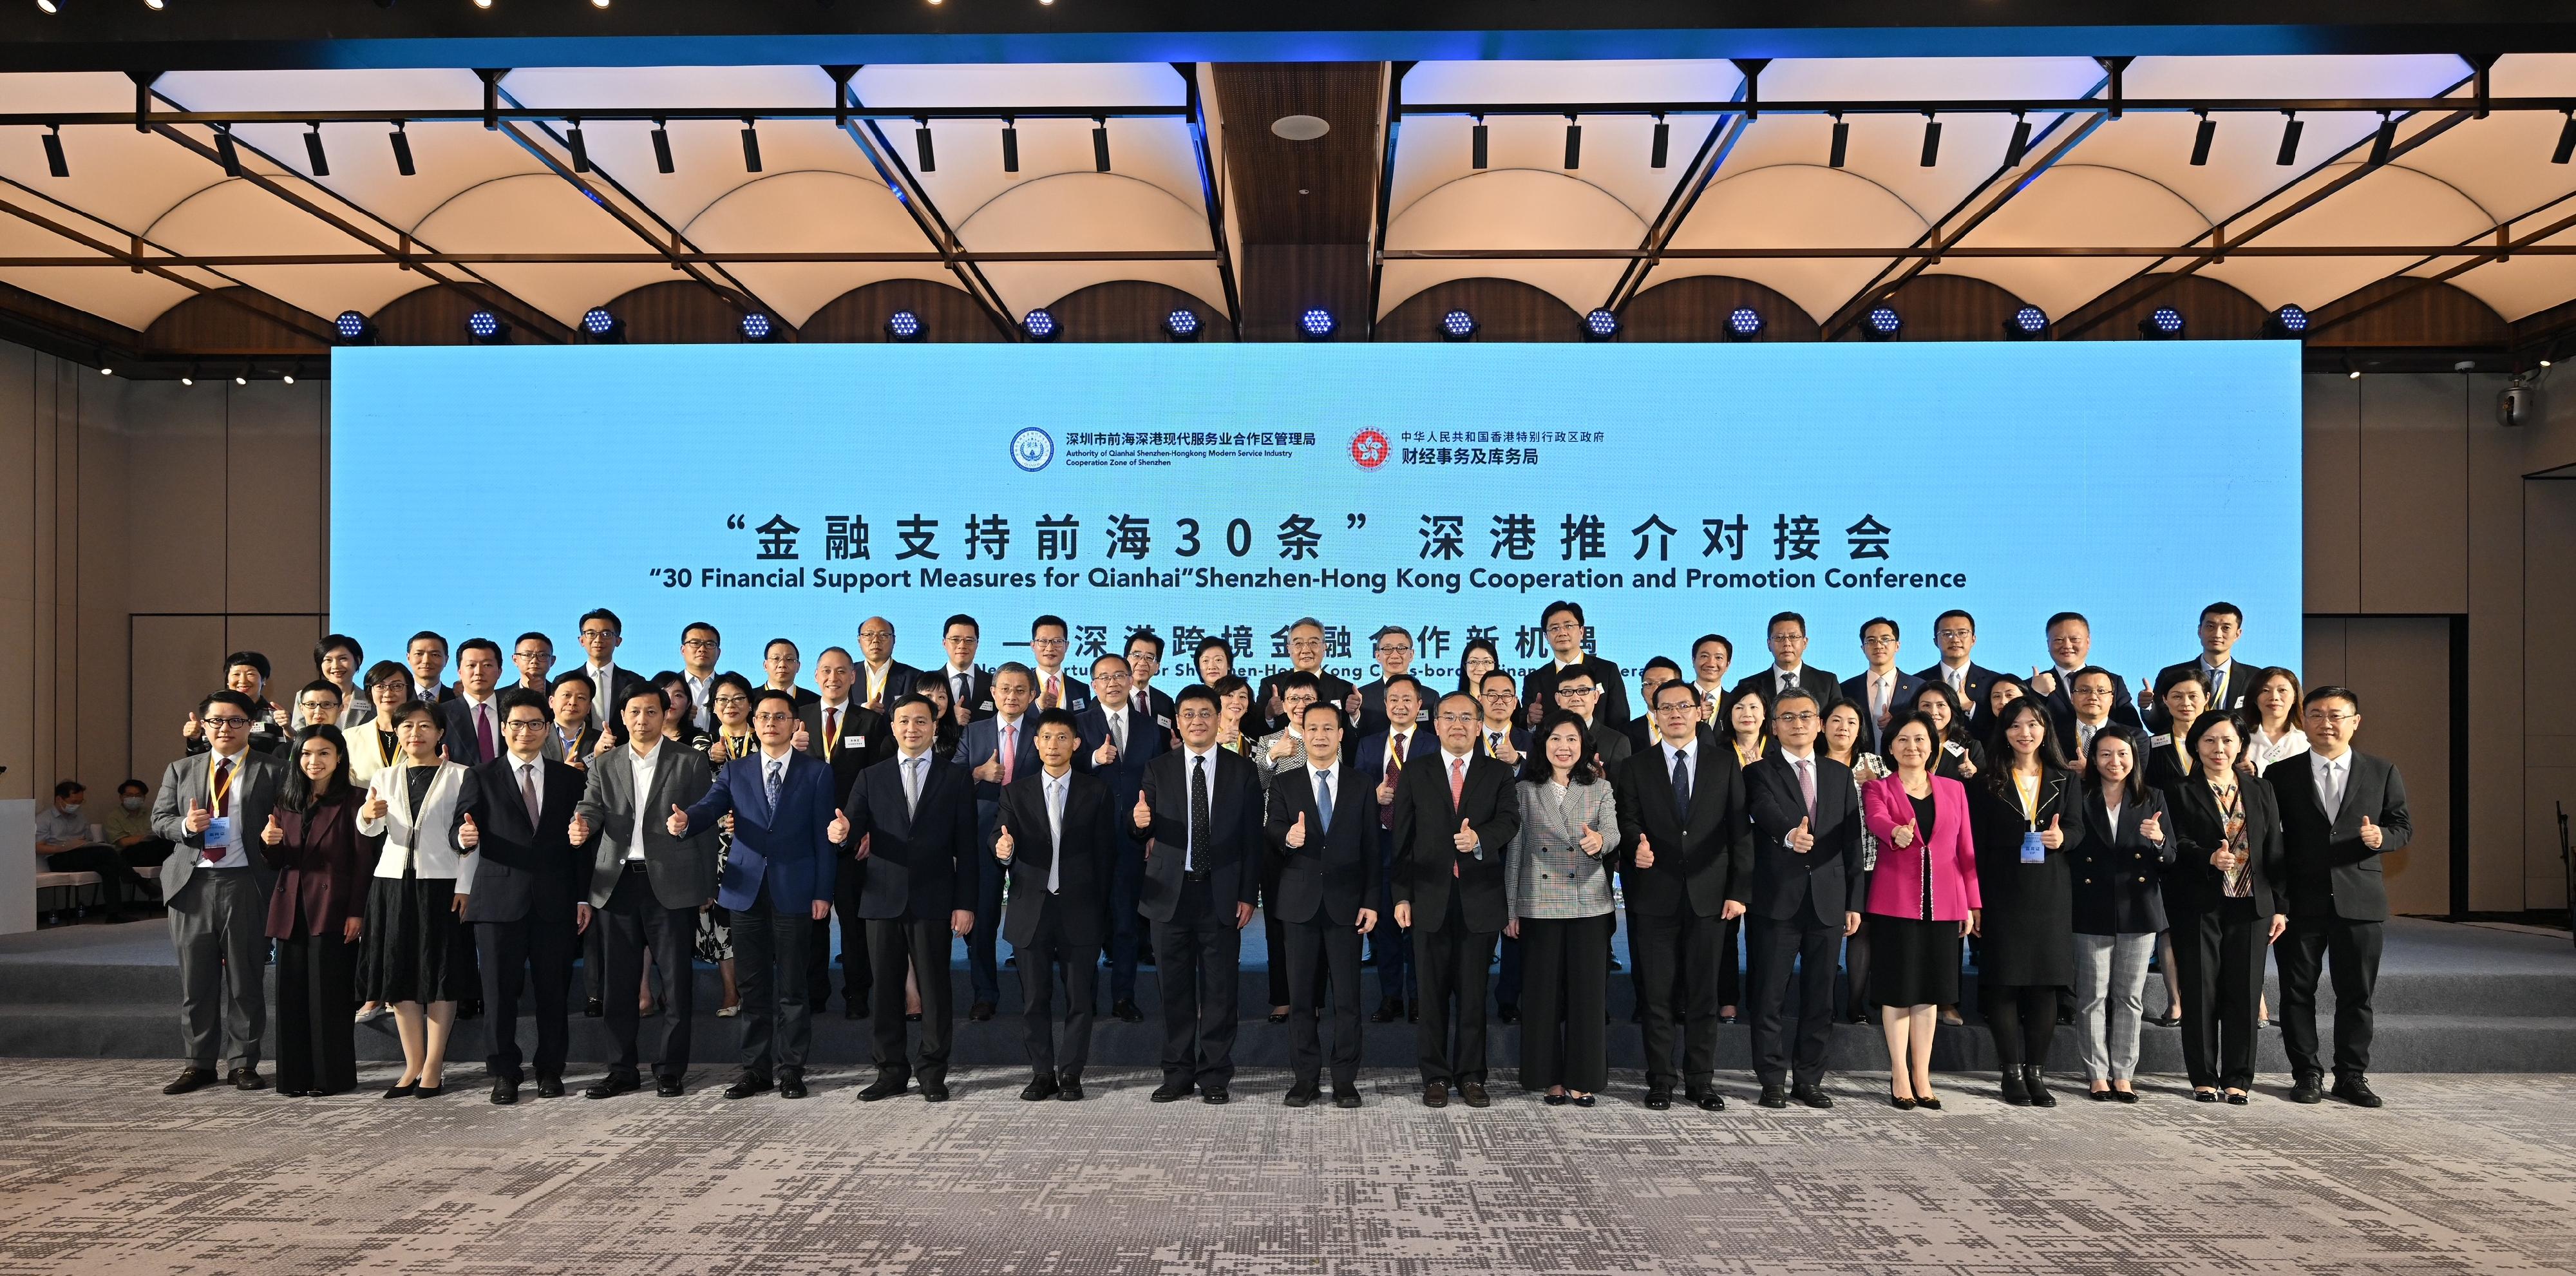 The Secretary for Financial Services and the Treasury, Mr Christopher Hui, led a Hong Kong financial sector delegation to attend a Shenzhen-Hong Kong liaison event on promoting 30 Financial Support Measures for Qianhai held in Shenzhen today (May 18). Photo shows Mr Hui (front row, ninth right) before the event with the member of the Standing Committee of the Shenzhen Municipal Committee of the Chinese Communist Party and Director General of the Authority of Qianhai Shenzhen-Hong Kong Modern Service Industry Cooperation Zone of Shenzhen Municipality (Qianhai Authority), Mr Zeng Pai (front row, tenth left); the Deputy Director-General of the Department of Economic Affairs of the Liaison Office of the Central People's Government in the Hong Kong Special Administrative Region, Mr Tan Yabo (front row, eighth left); the Chief Editor of the Foreign Exchange Research Center of the State Administration of Foreign Exchange, Mr Chen Zhiwei (front row, ninth left); the Secretary of the CPC Committee of Shenzhen Municipal Financial Regulatory Bureau, Mr Shu Yumin (front row, seventh right); and the First Deputy Director General of the Qianhai Authority, Mr Huang Xiaopeng (front row, seventh left). Also pictured are the Permanent Secretary for Financial Services and the Treasury (Financial Services), Ms Salina Yan (front row, eighth right); the Under Secretary for Financial Services and the Treasury, Mr Joseph Chan (front row, fourth left); and the Political Assistant to Secretary for Financial Services and the Treasury, Mr Julian Ip (front row, first left).
